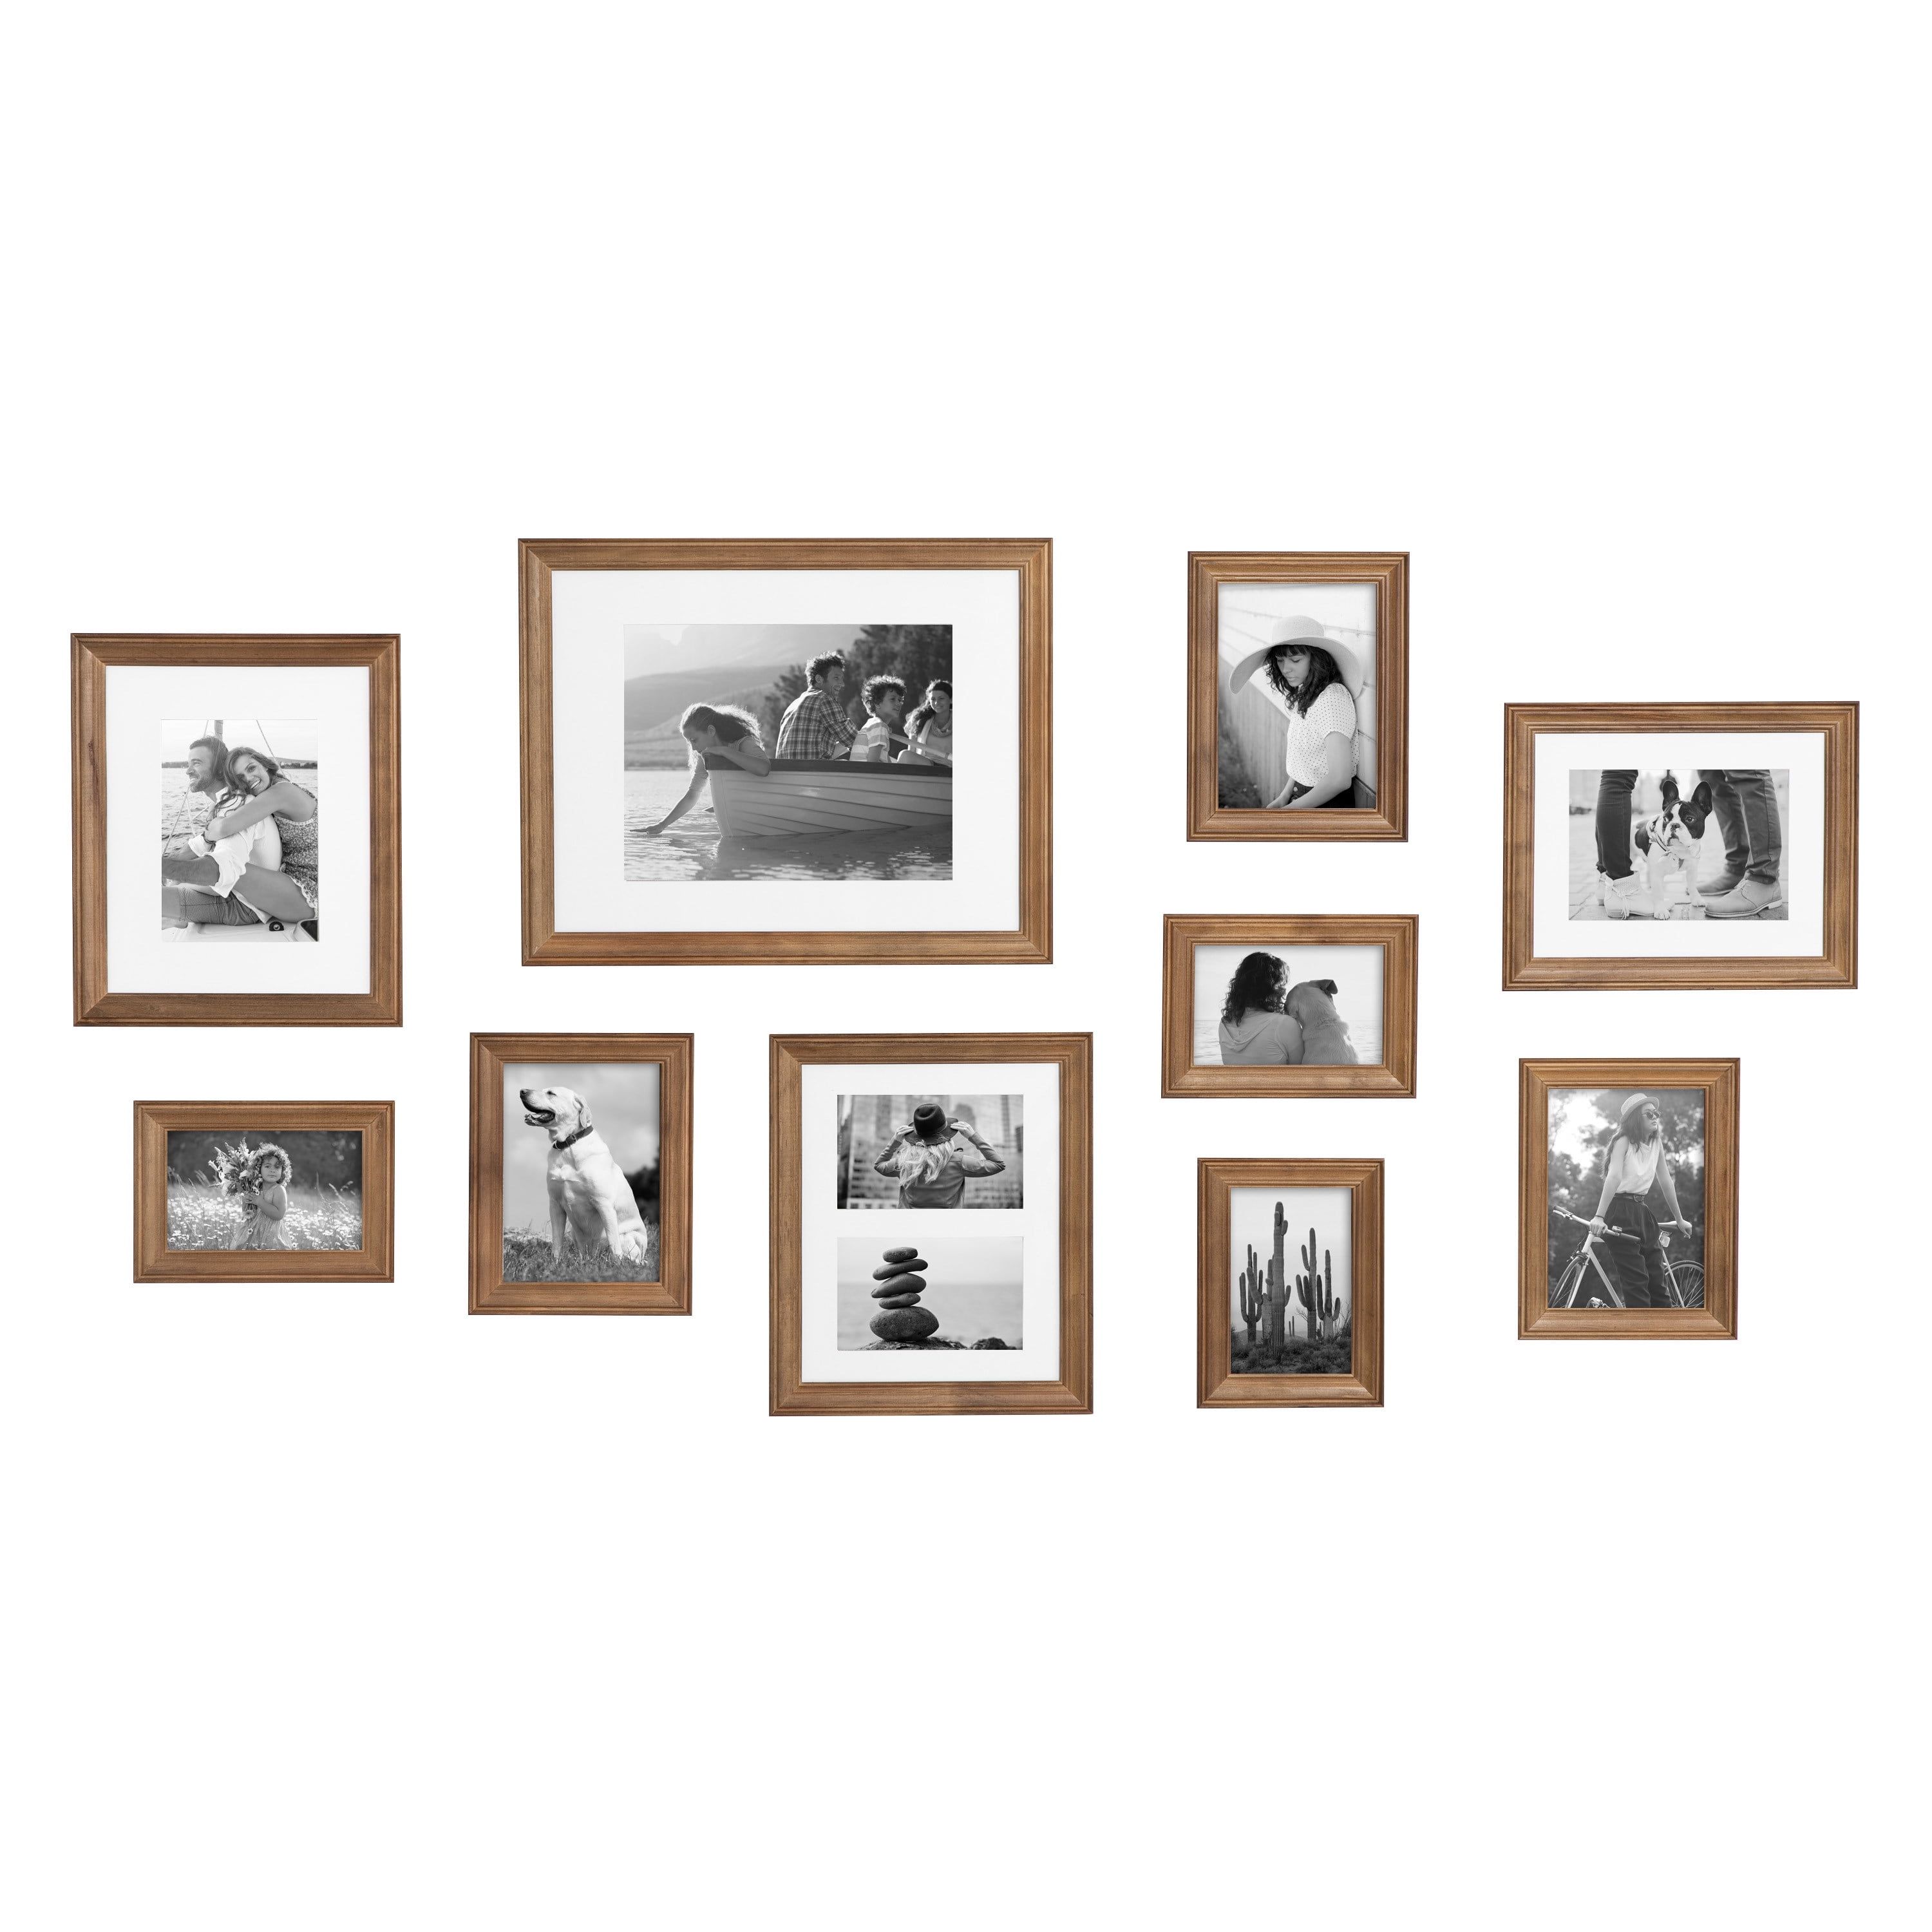  Outgeek Black Picture Frame Multi Size Set of 6 Bulk Wooden  Square Matted Photo Frames with Mat Including Two 4x6, Two 5x7, Two 8x10 -  Wall Gallery Hanging or Tabletop